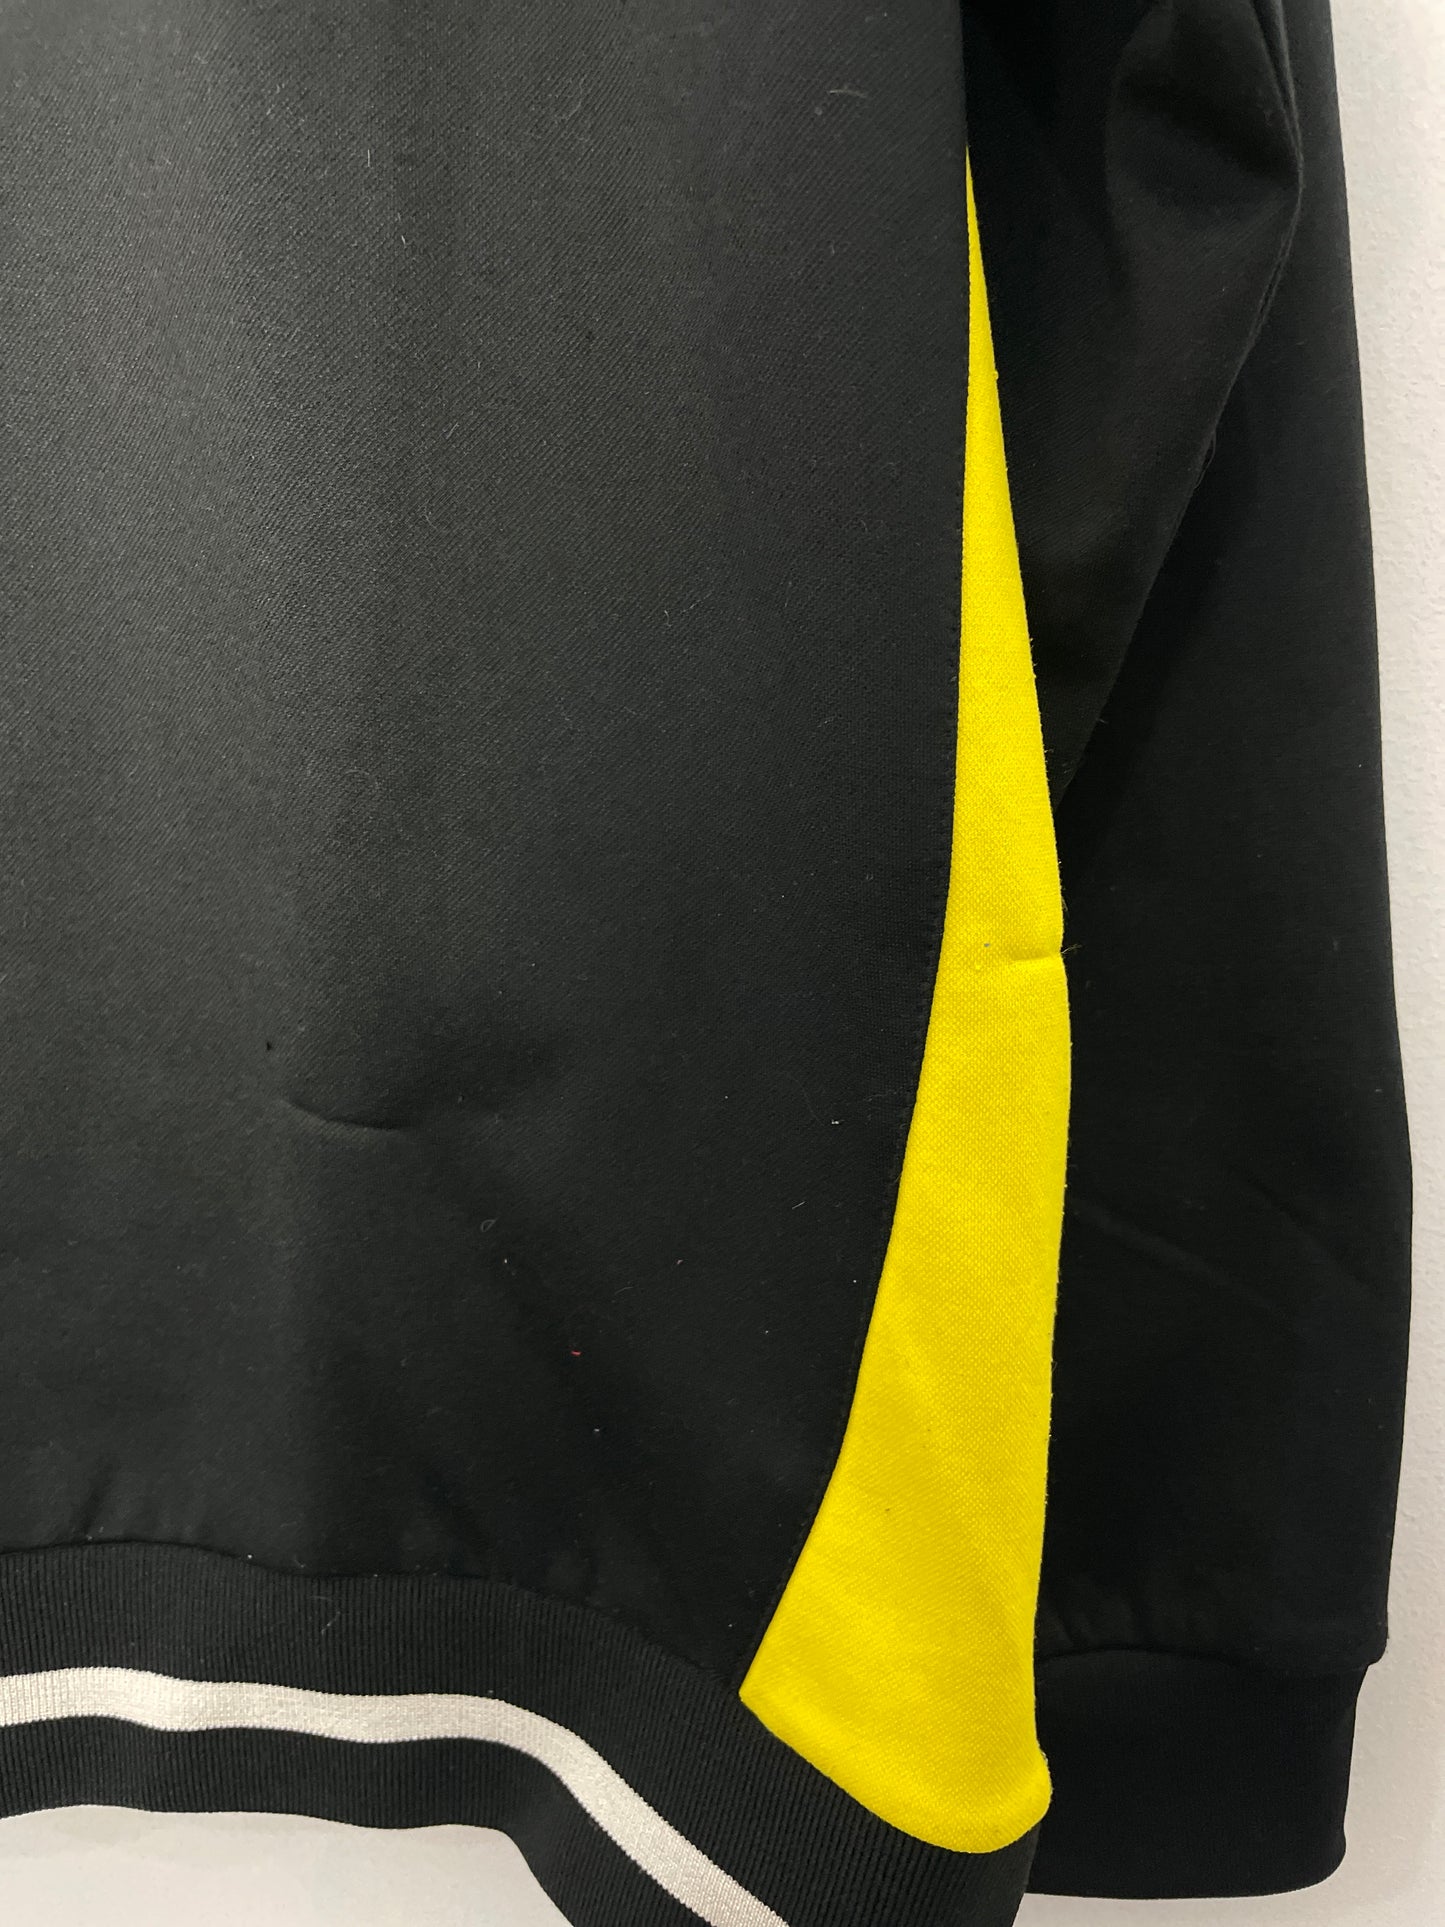 2018/19 PARTICK THISTLE TRACKSUIT TOP (M) JOMA